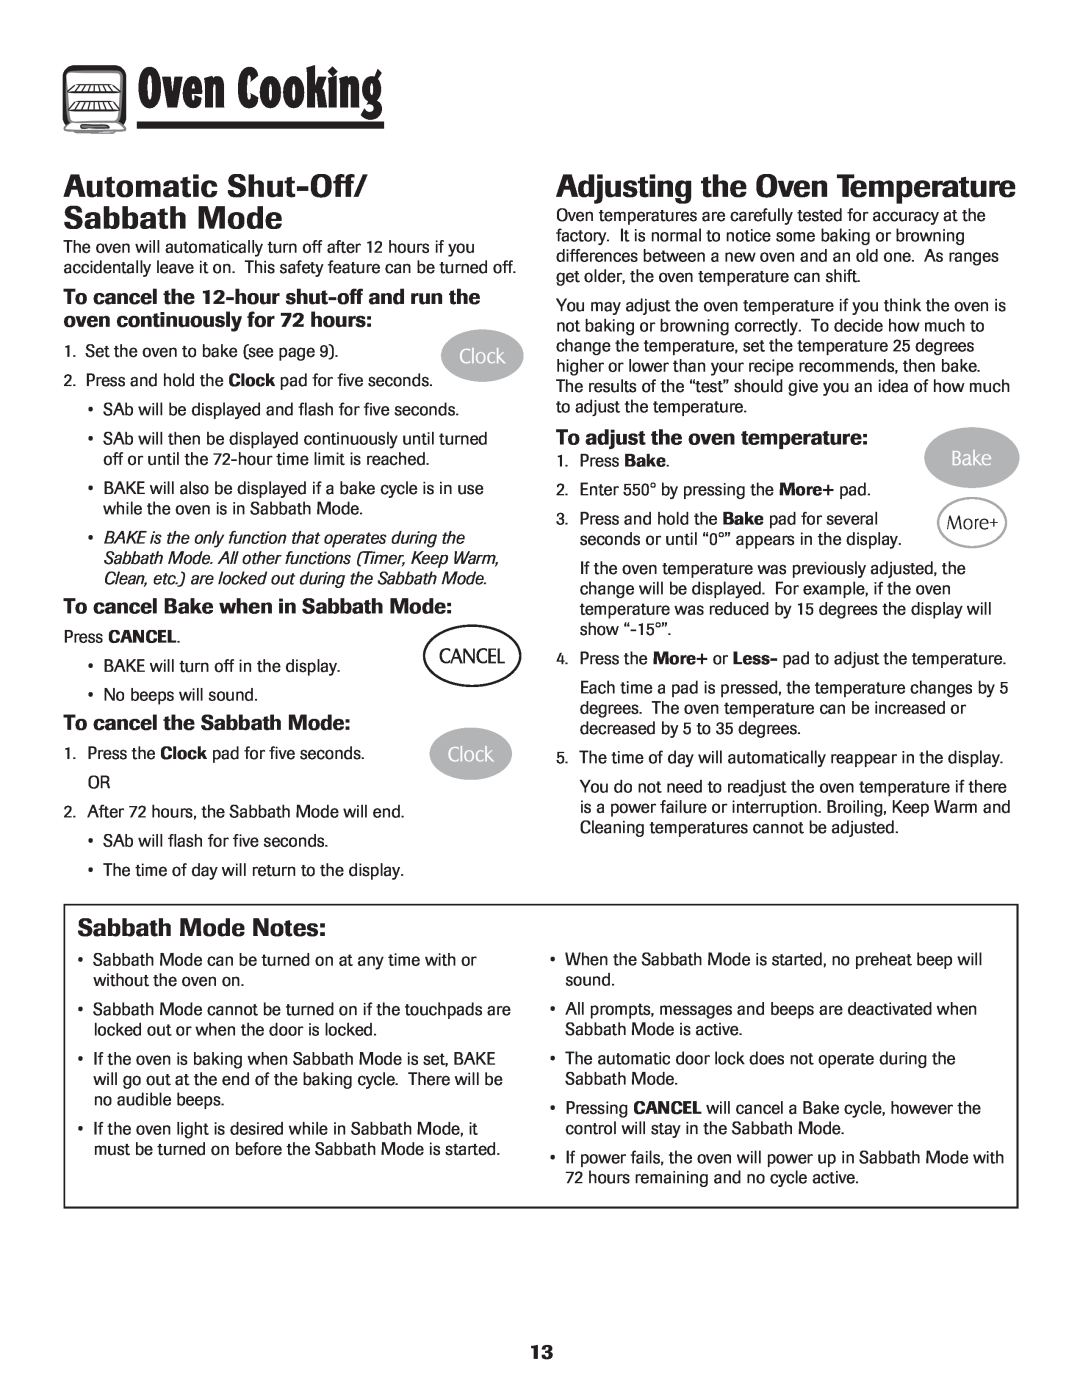 Maytag MES5752BAW manual Automatic Shut-Off Sabbath Mode, Adjusting the Oven Temperature, Sabbath Mode Notes, Oven Cooking 